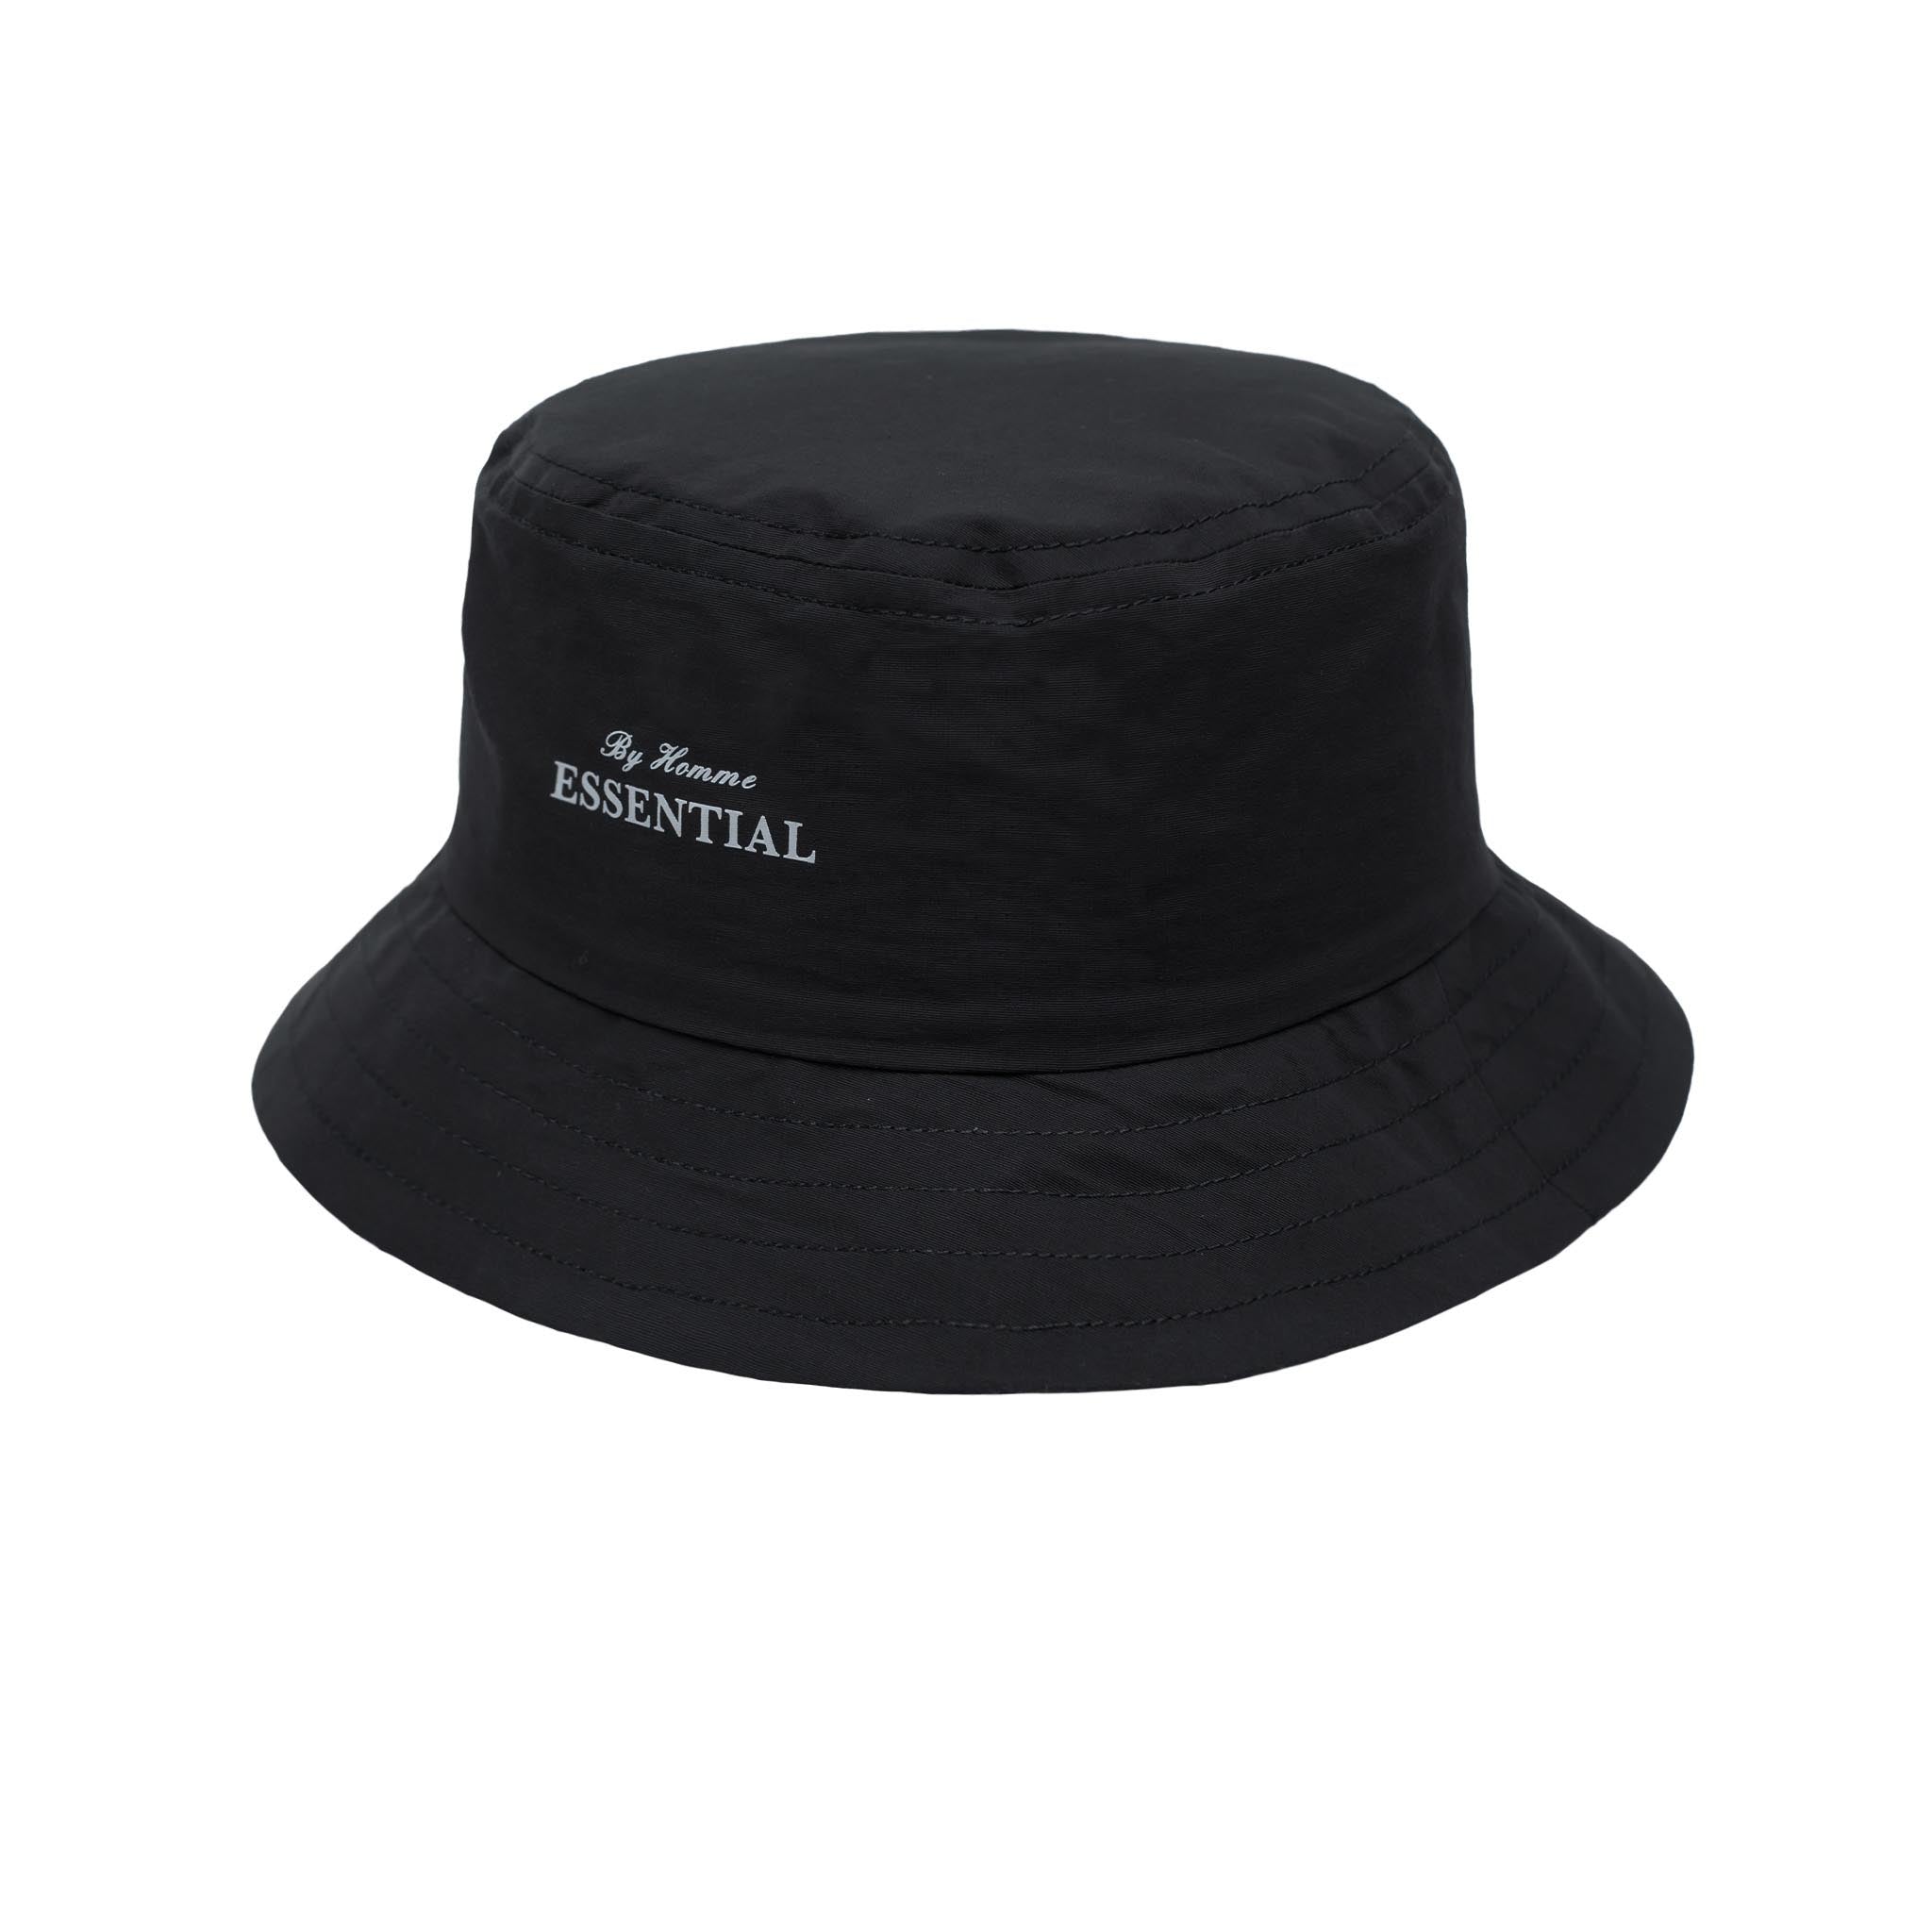 HOMME+ ESSENTIAL by Homme Bucket Hat Black